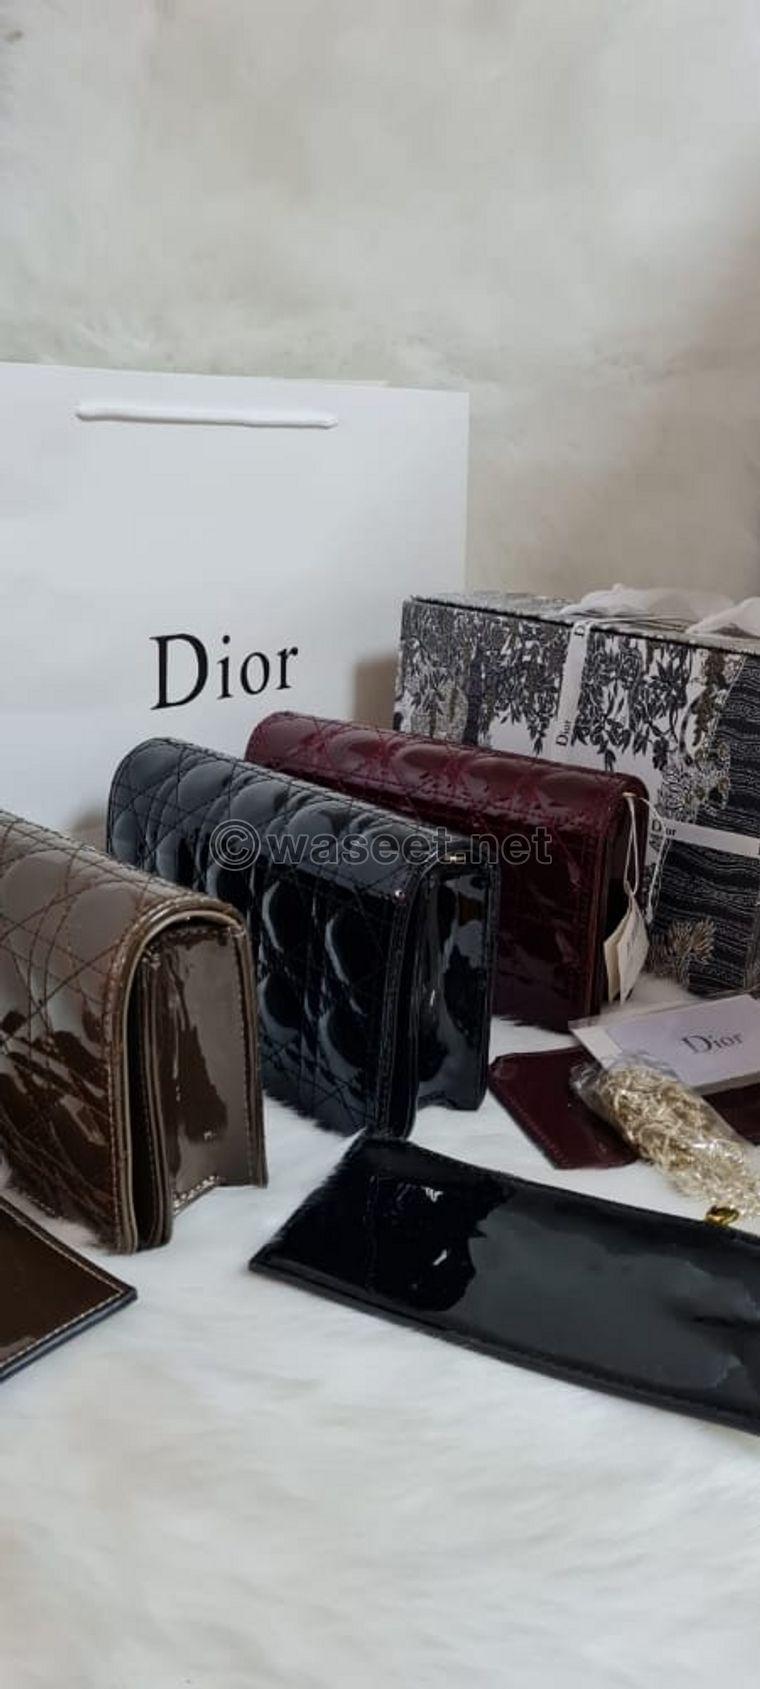 Dior bags for sale 0